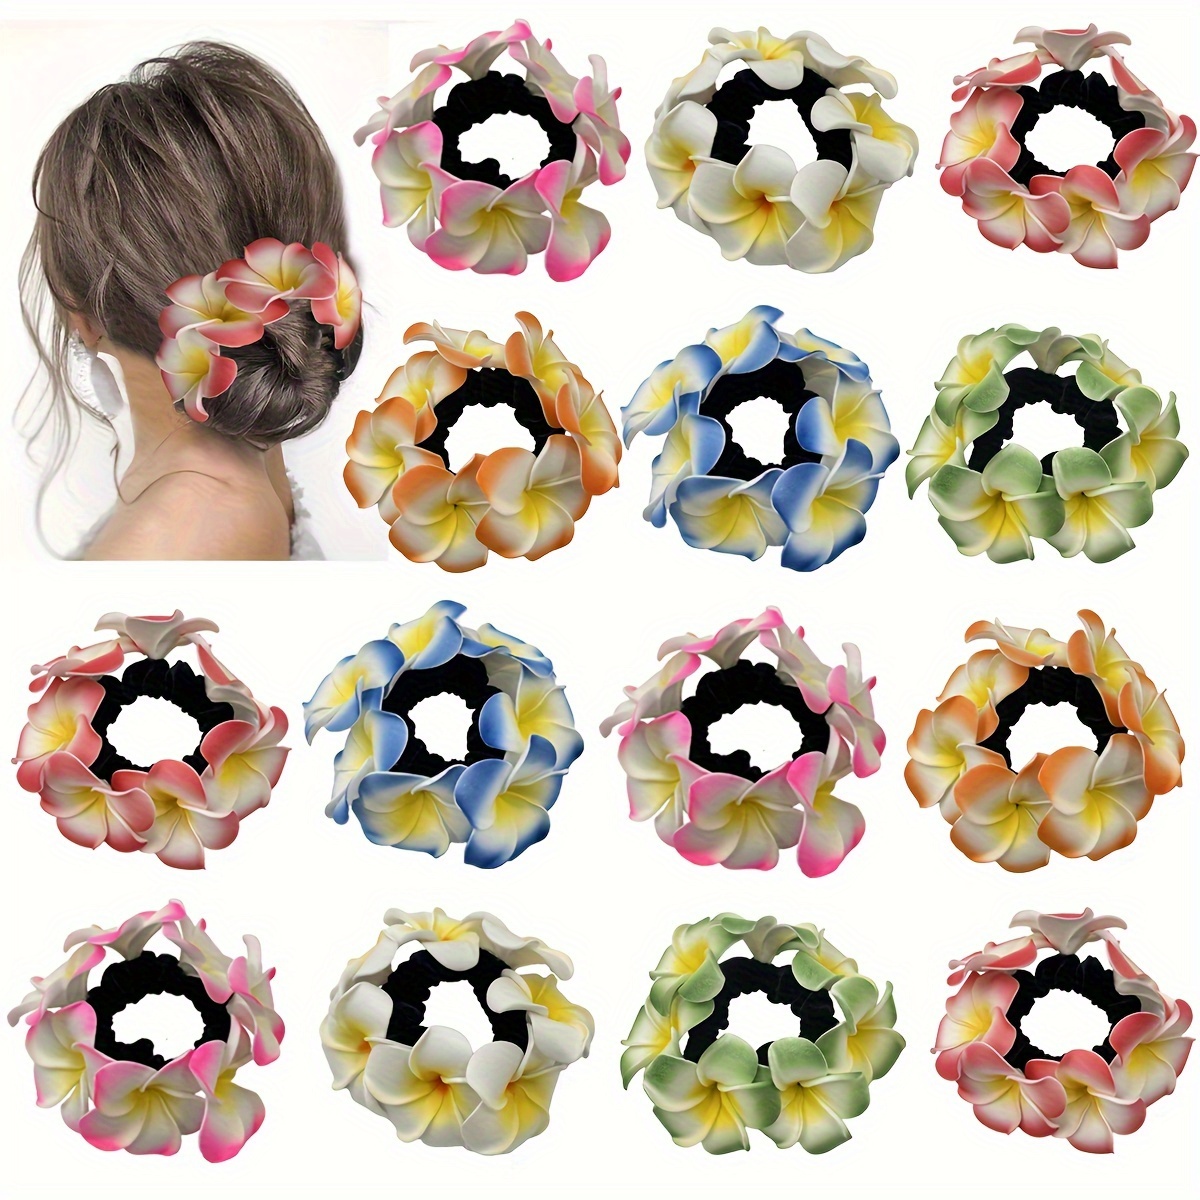 

Bohemian Style Flower Hair Ties, Elastic Hair Bands, Simulation Fabric Floral Hair Accessories For Bun And Ponytail